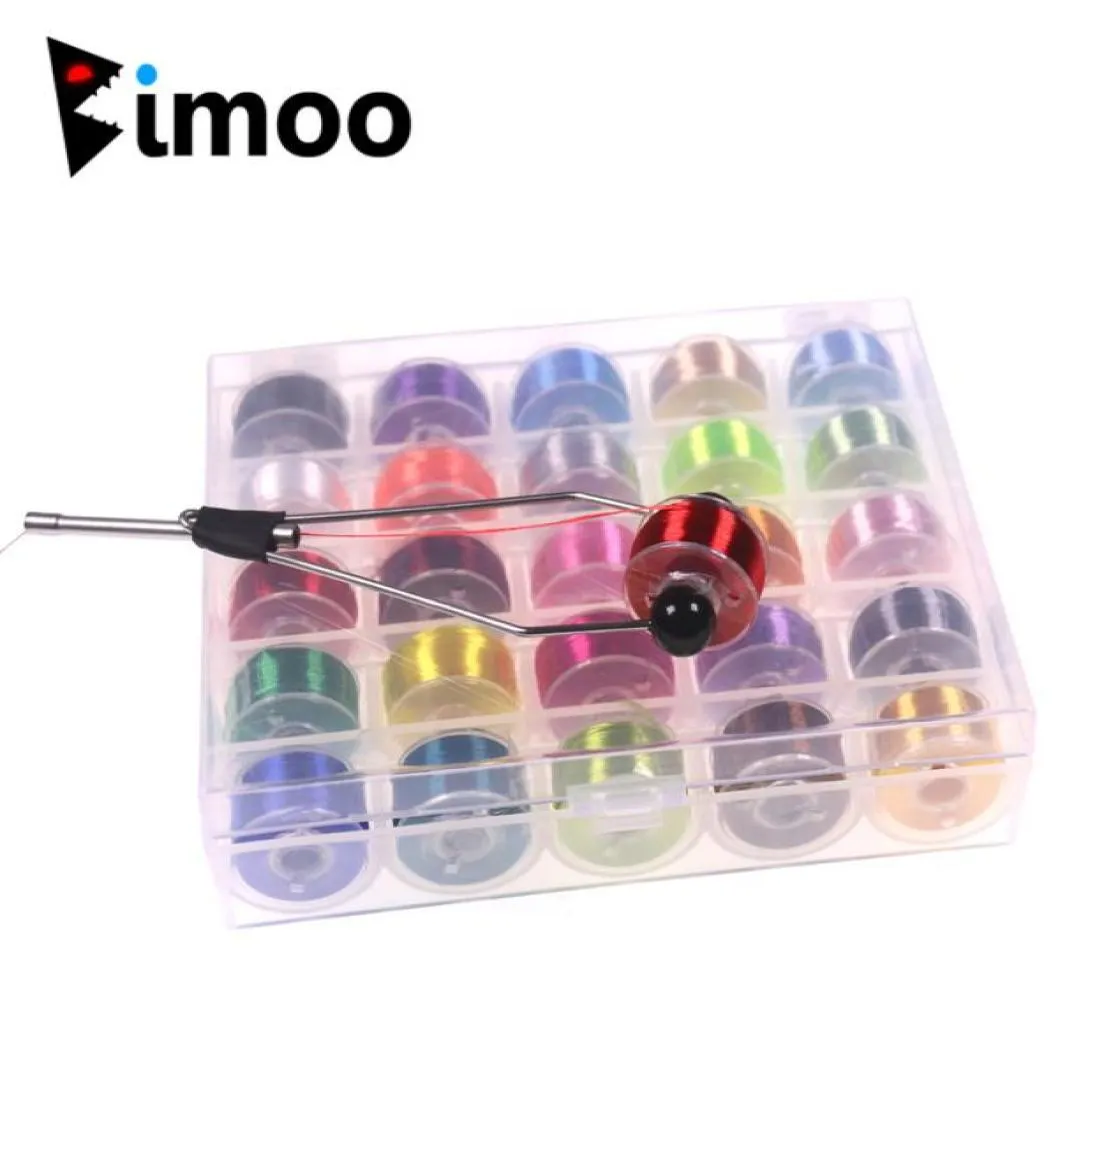 Bimoo Assorted 200D Fly Tying Thread For Size 614 Flies Fly Fishing Lure  Making Material Biceramic Tip Bobbin Holder 2016921054 From 19,88 €